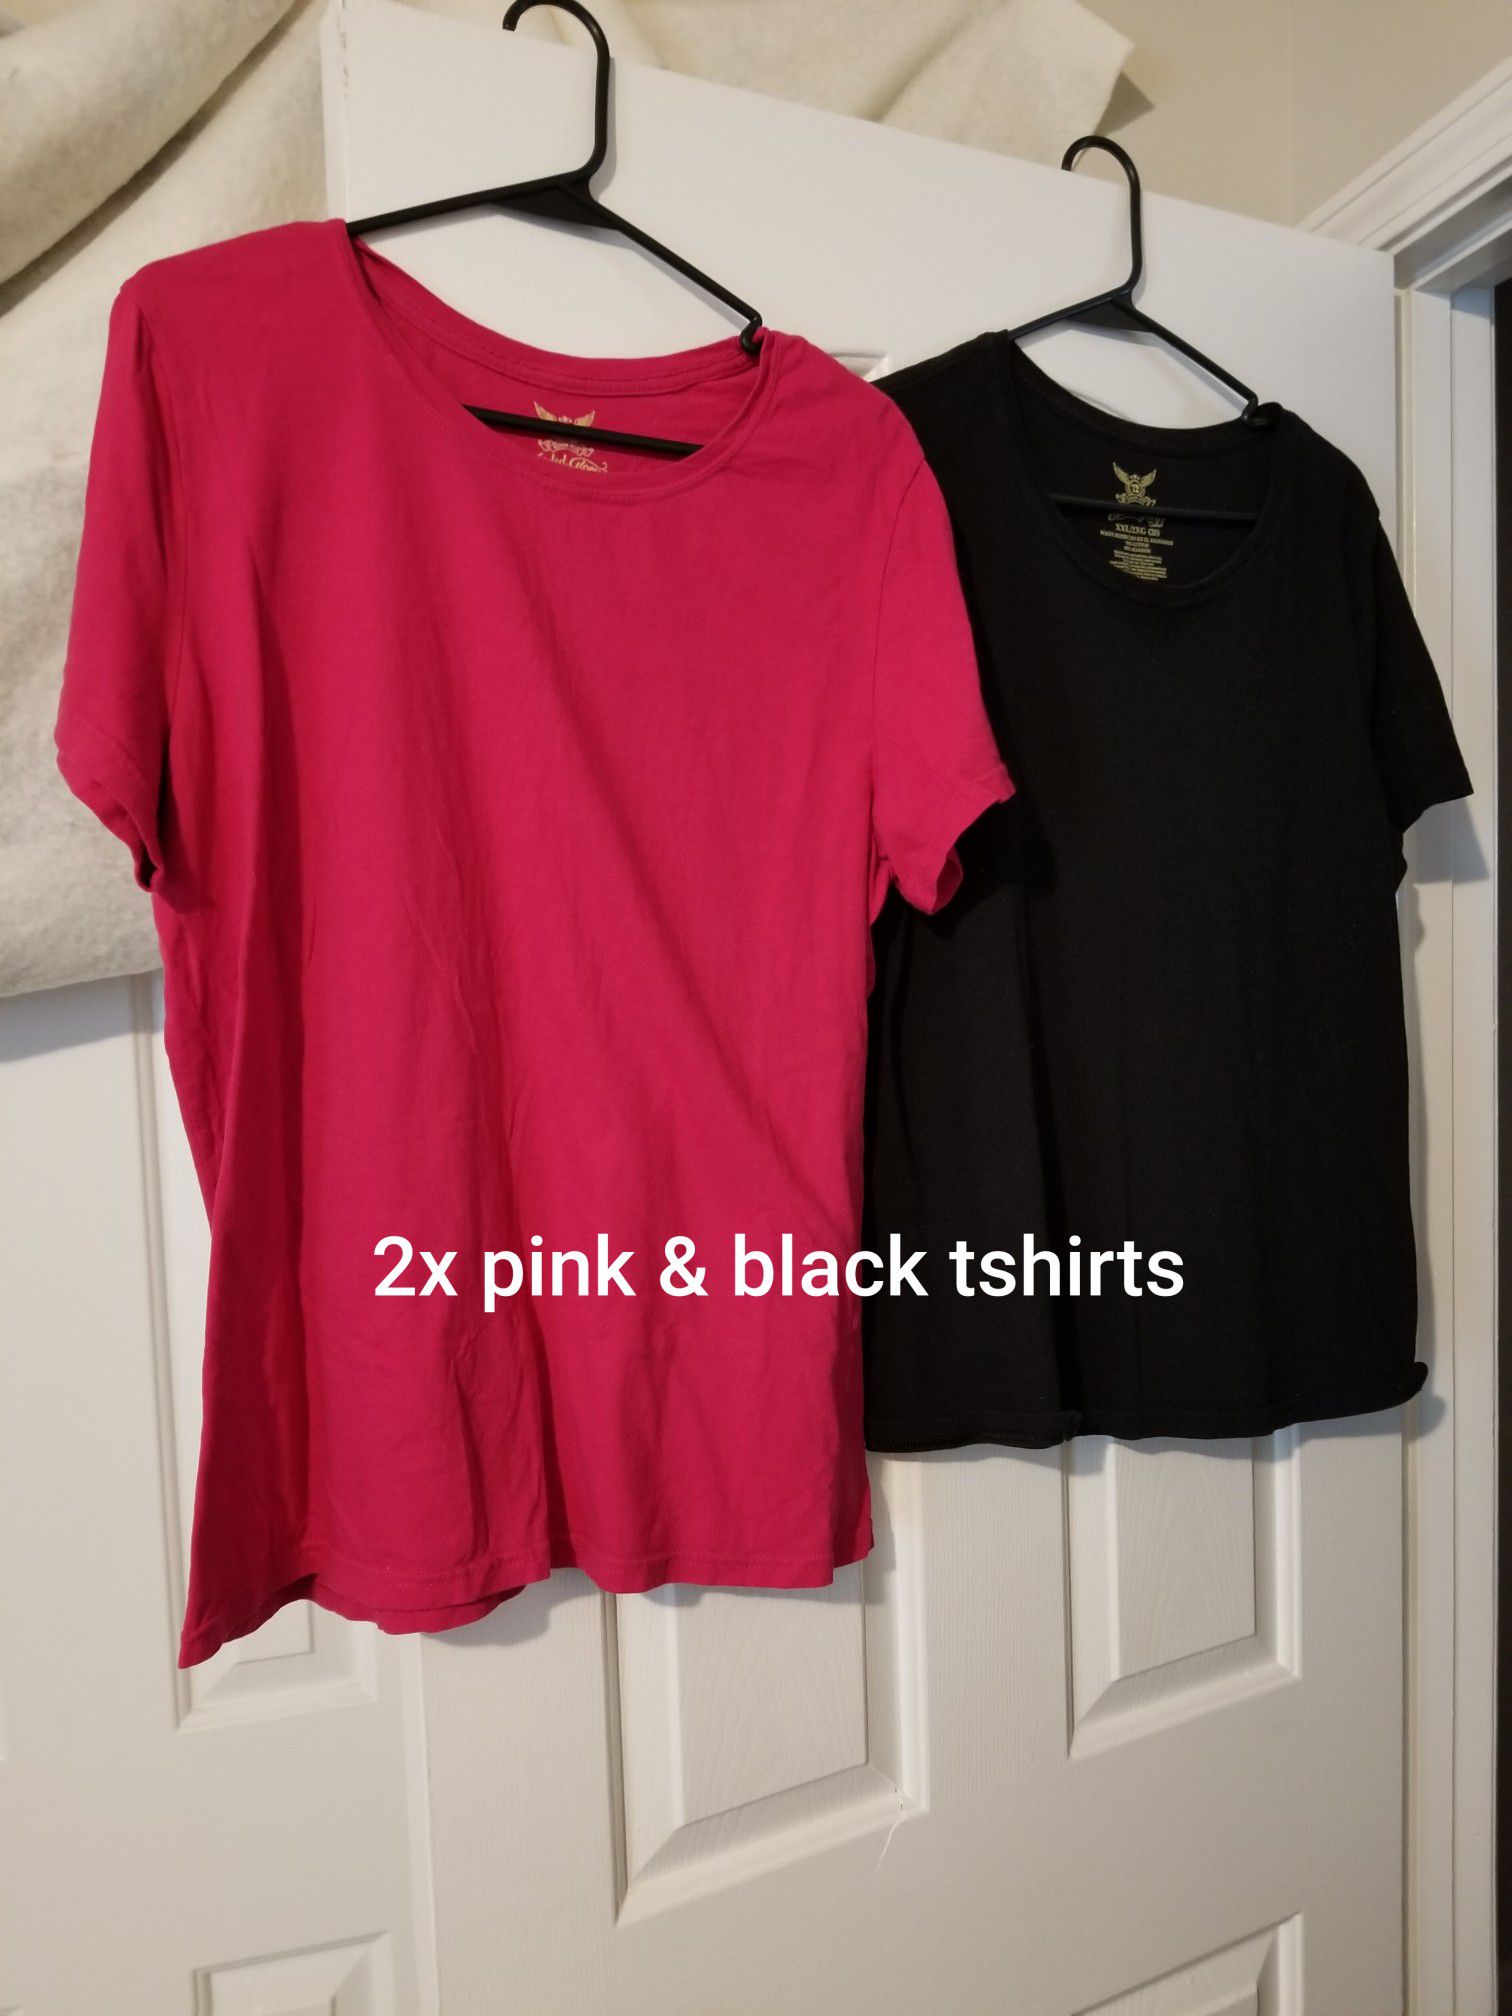 Size 2x pink & black tshirts (2 for $4)